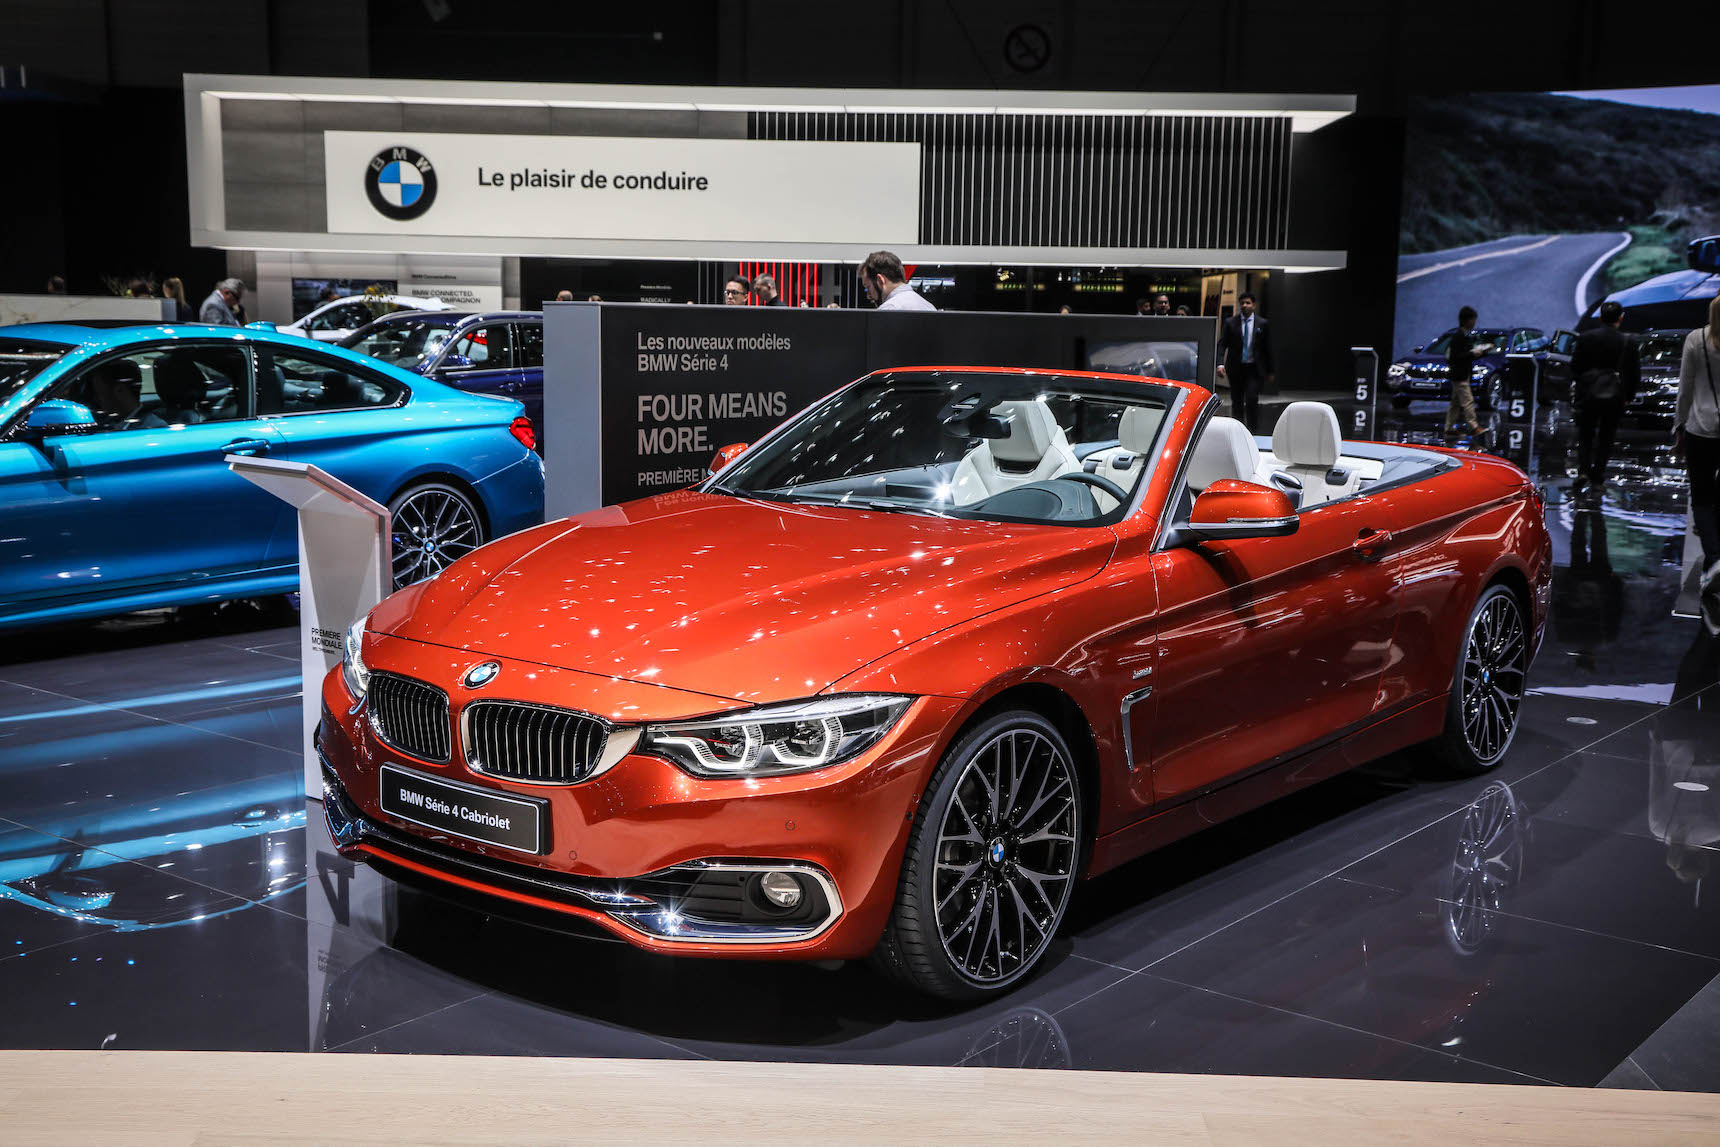 The BMW 4 Series convertible on display during the second press day of the Geneva Motor Show 2017